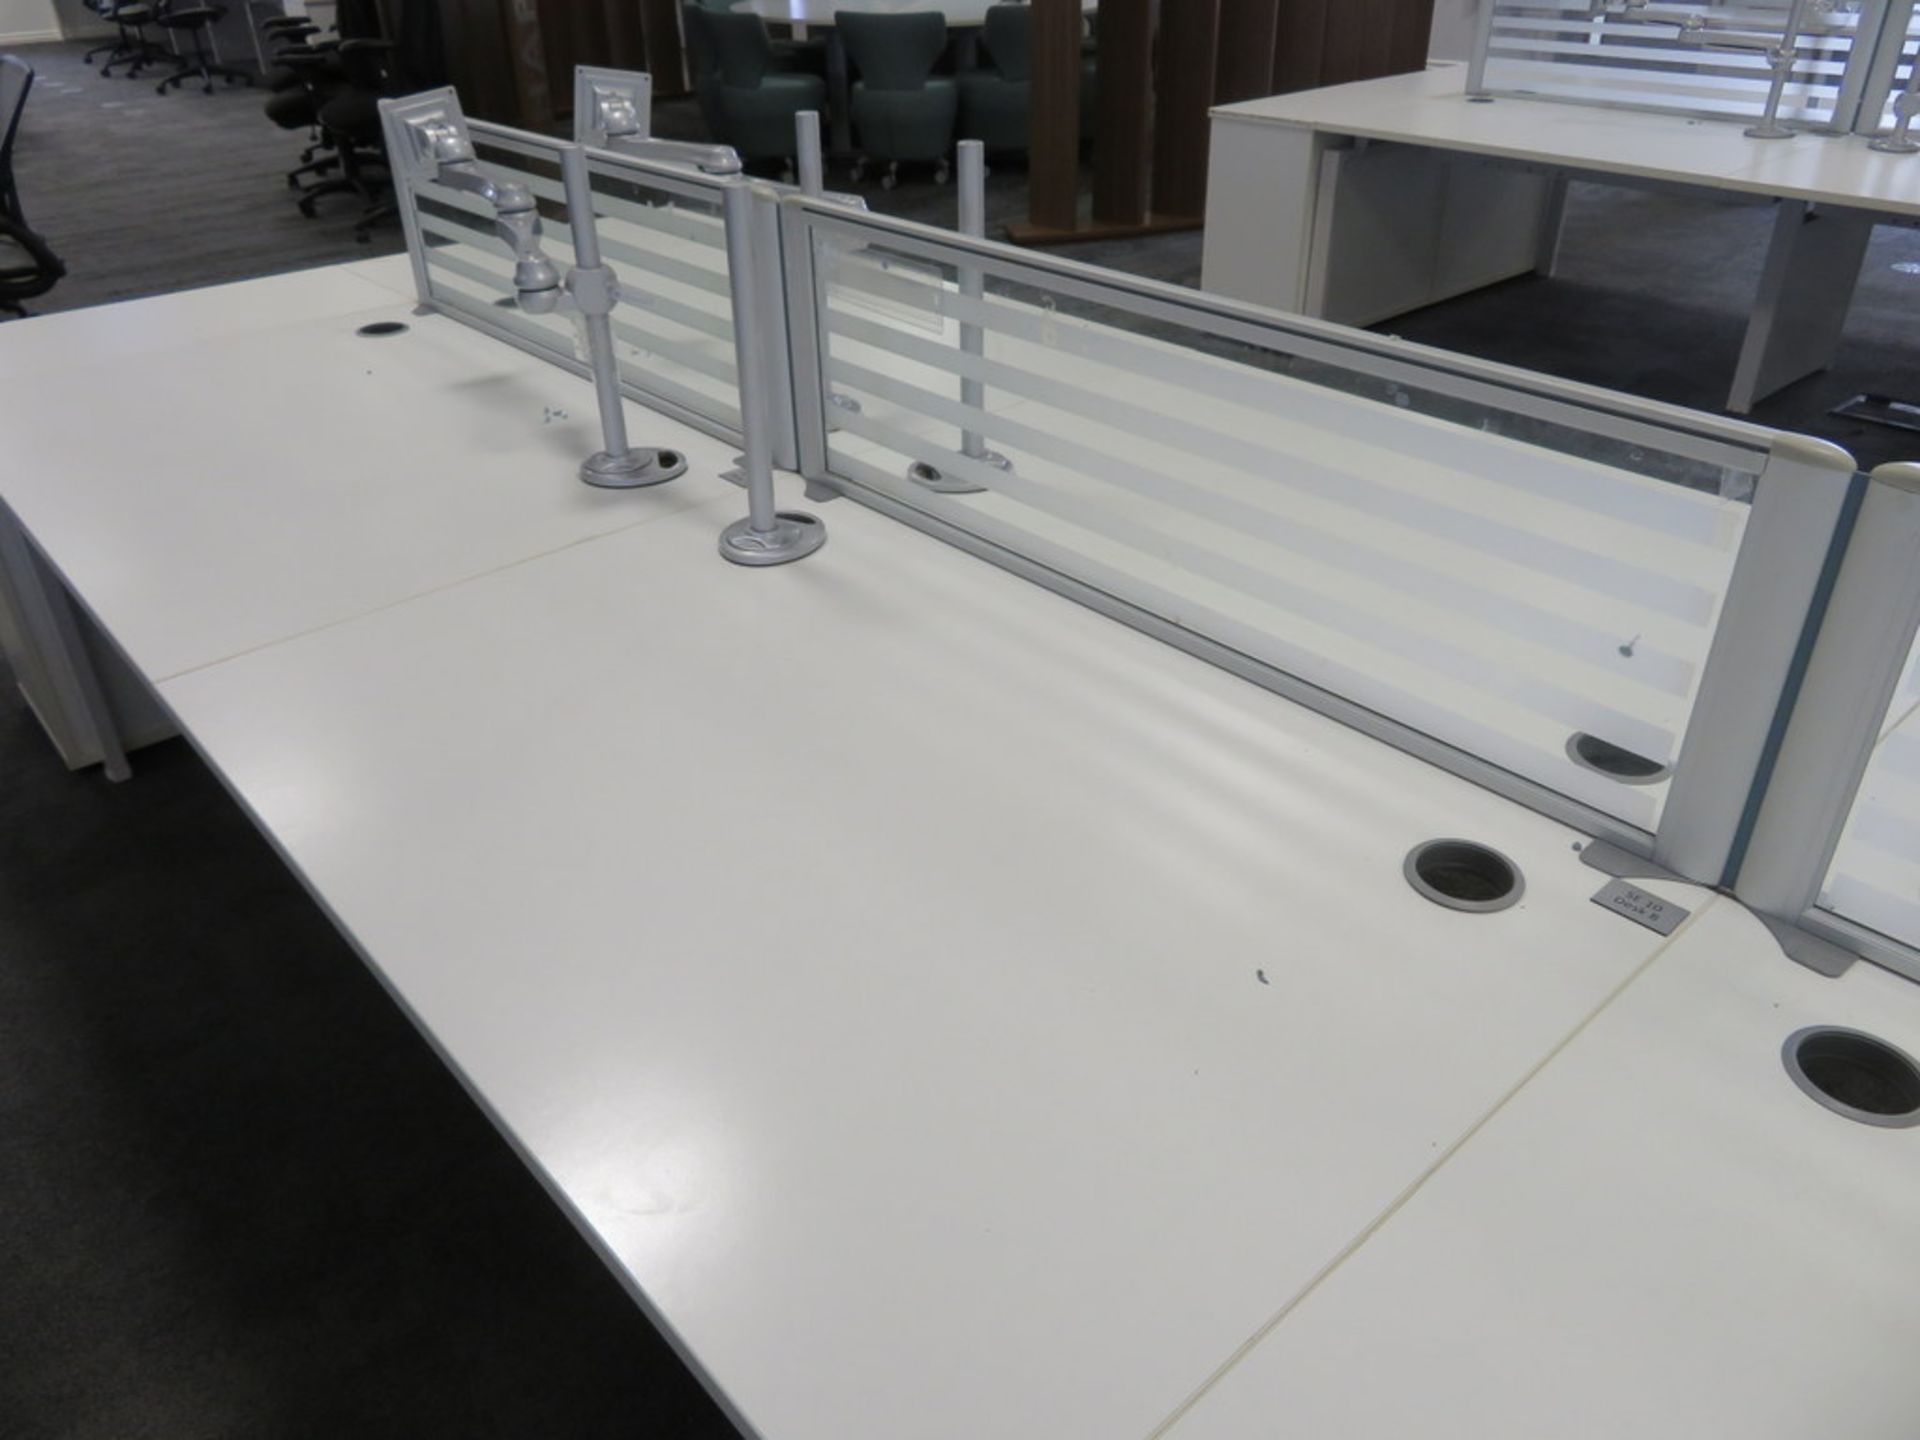 12 Person Desk Arrangement With Dividers, Monitor Arms & Storage Cupboards. - Image 4 of 5